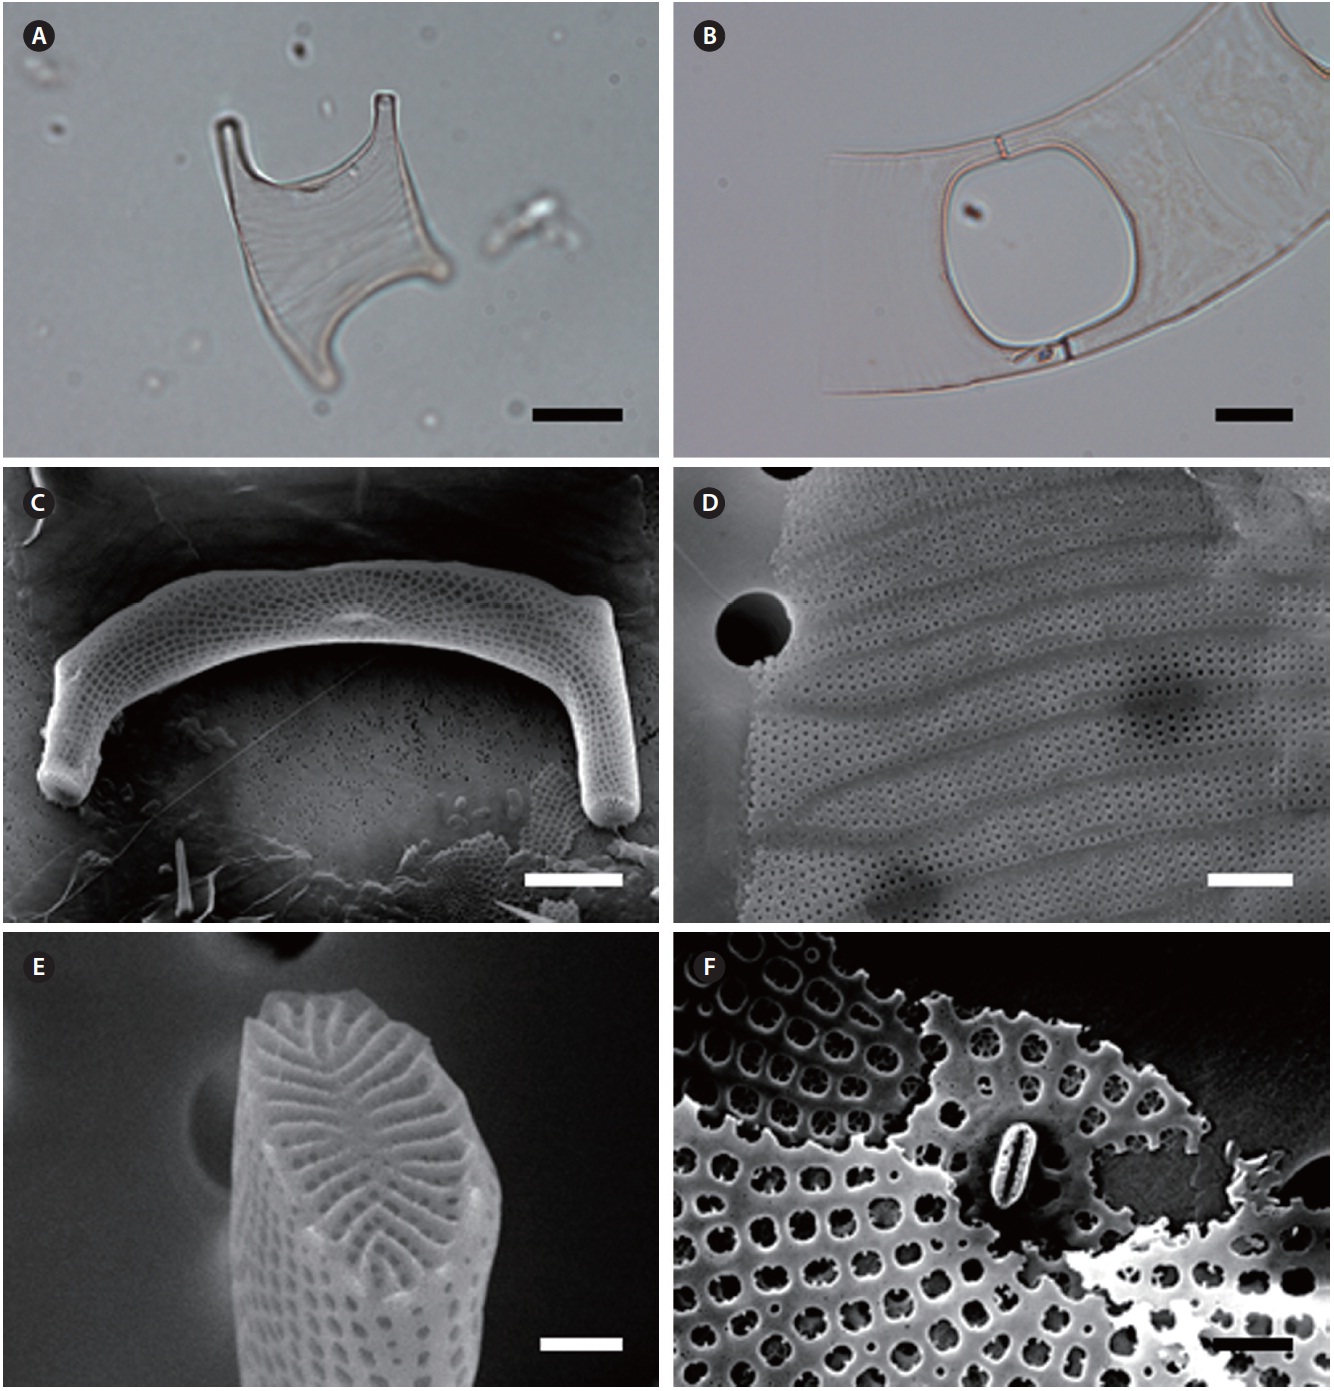 Eucampia zodiacus f. cylindrocornis. (A) Solitary cell with rectangular form in broad girdle view, light microscopy (LM). (B) Two-celled chain, almost rectangular aperture shape, LM. (C) Long and narrow cylindrical elevations, labiate process on the valve center, scanning electron microscopy (SEM). (D) Intercalary bands with rows of puncta, SEM. (E) Ocellus with linear ribs, SEM. (F) Labiate process, SEM. Scale bars represent: A & B, 10 μm; C, 5 μm; D, 2 μm; E & F, 1 μm.